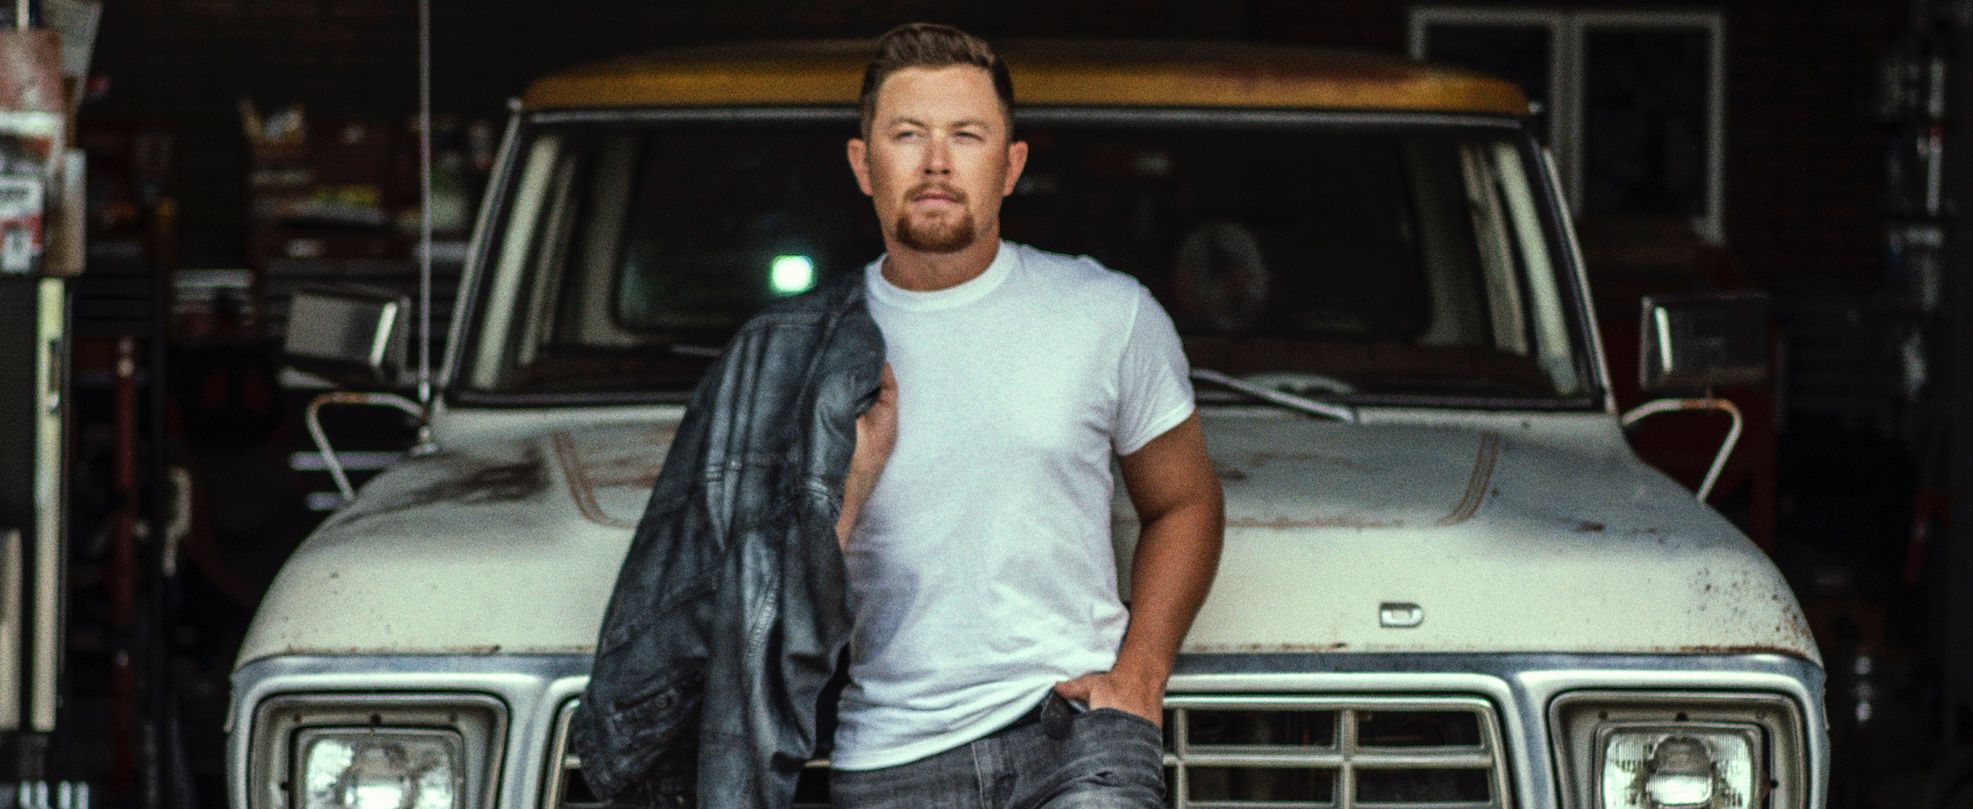 Scotty McCreery Talks Touring with New Baby: “I’m Going to Be a Road Daddy for a While”